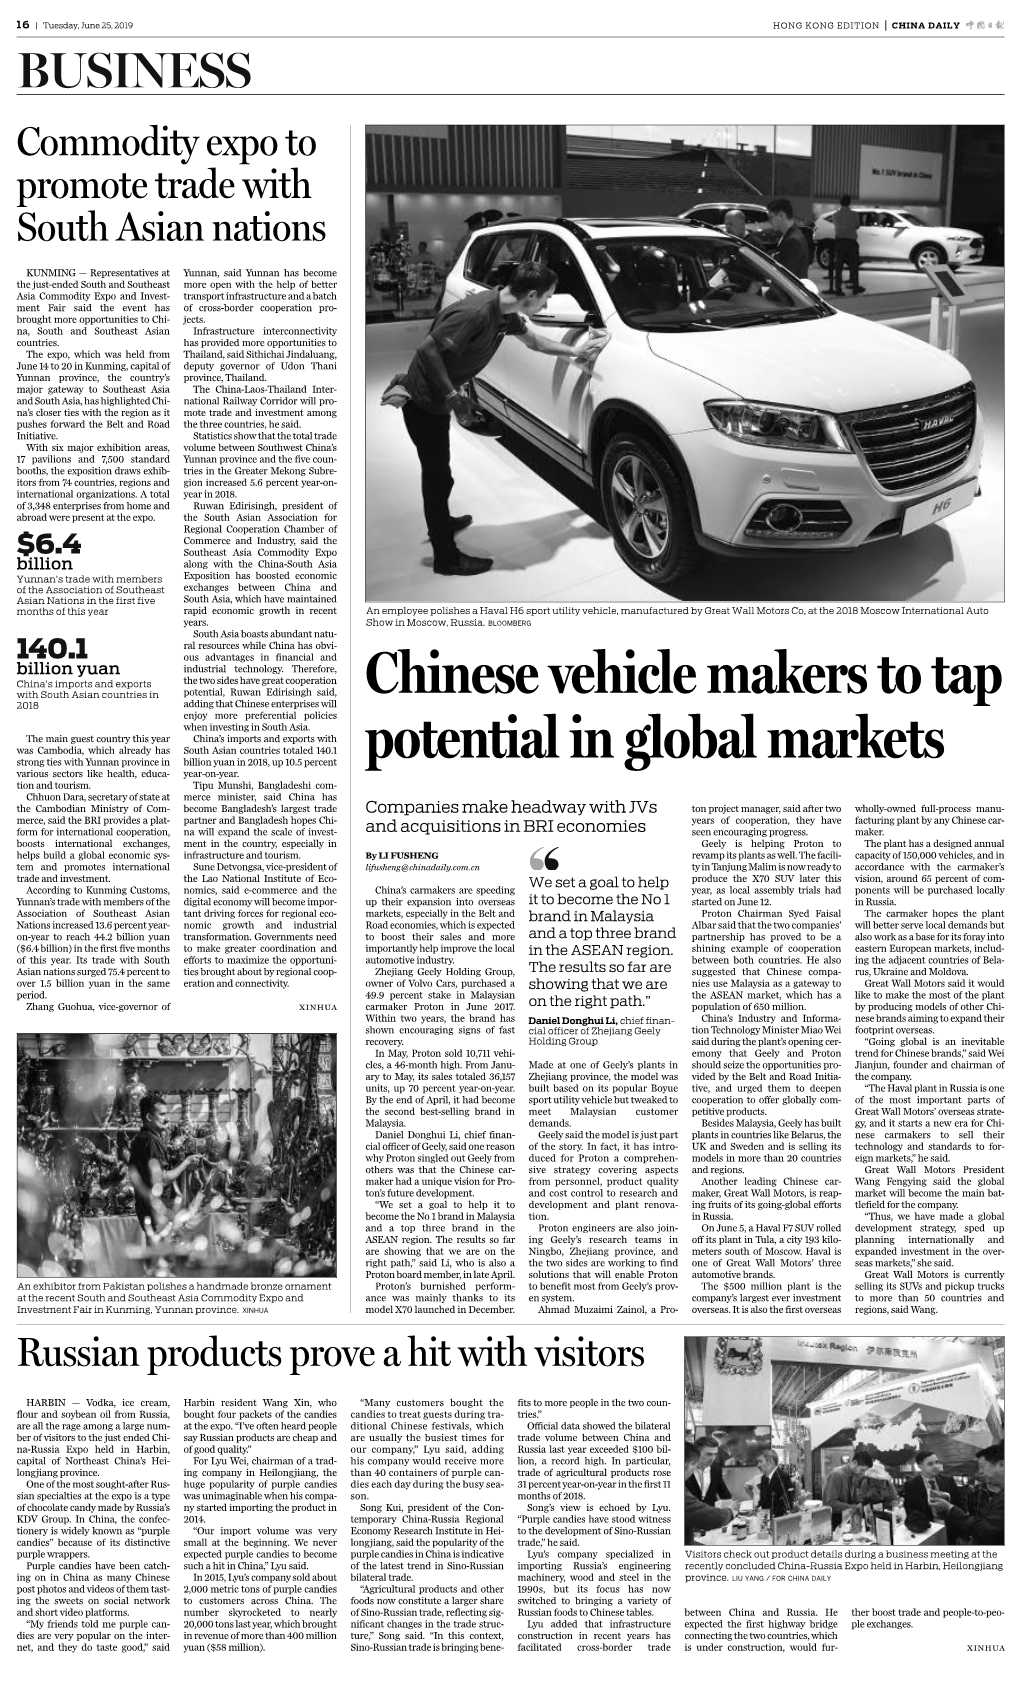 Chinese Vehicle Makers to Tap Potential in Global Markets